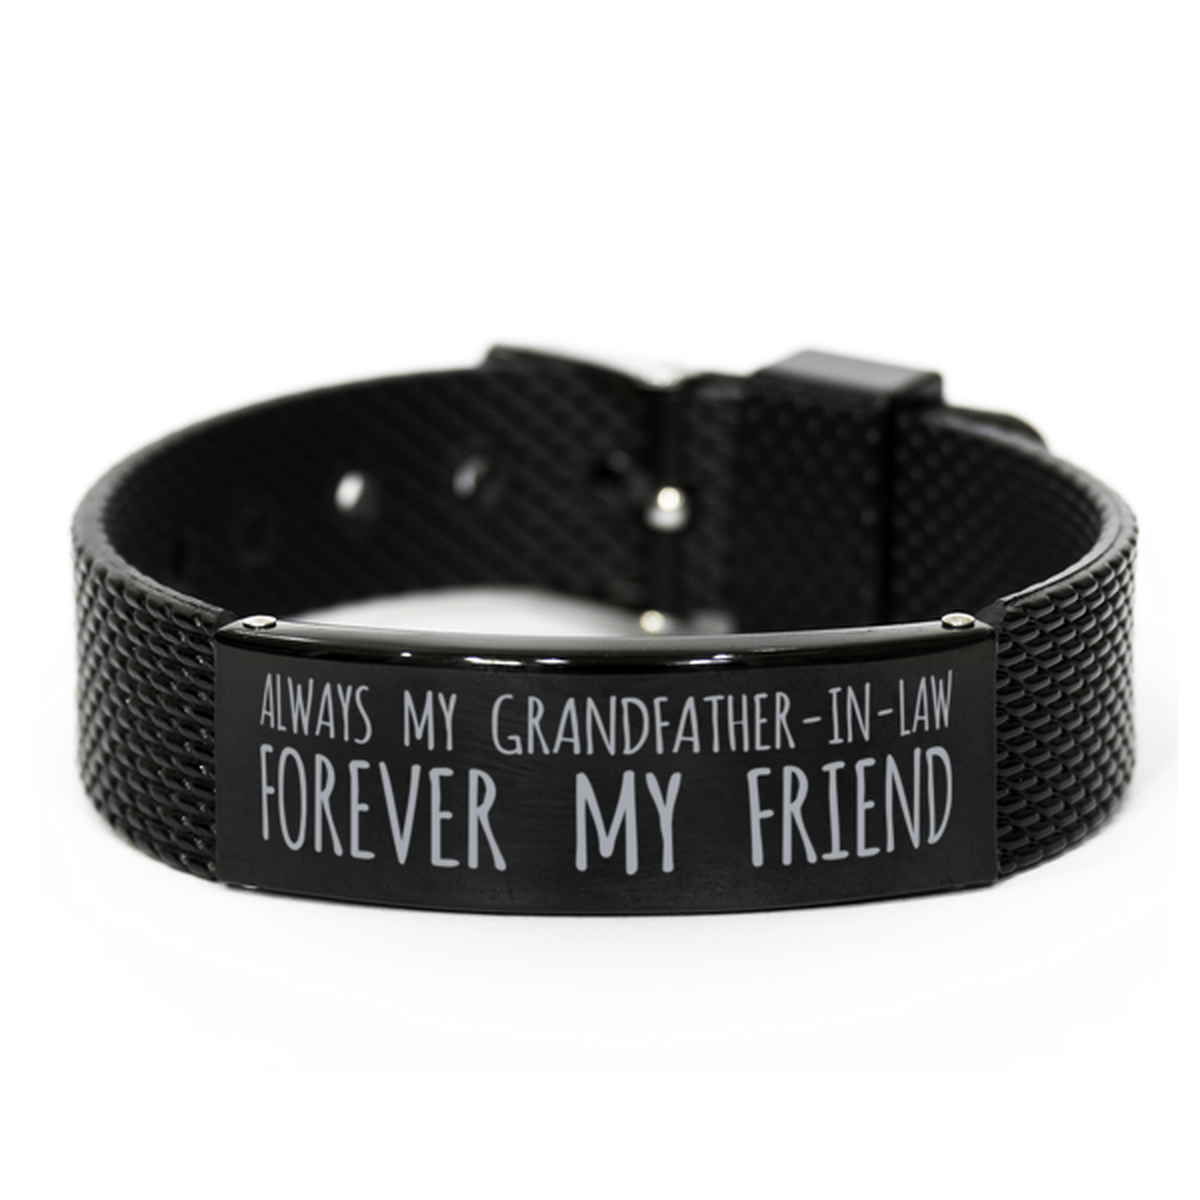 Inspirational Grandfather-In-Law Black Shark Mesh Bracelet, Always My Grandfather-In-Law Forever My Friend, Best Birthday Gifts for Family Friends